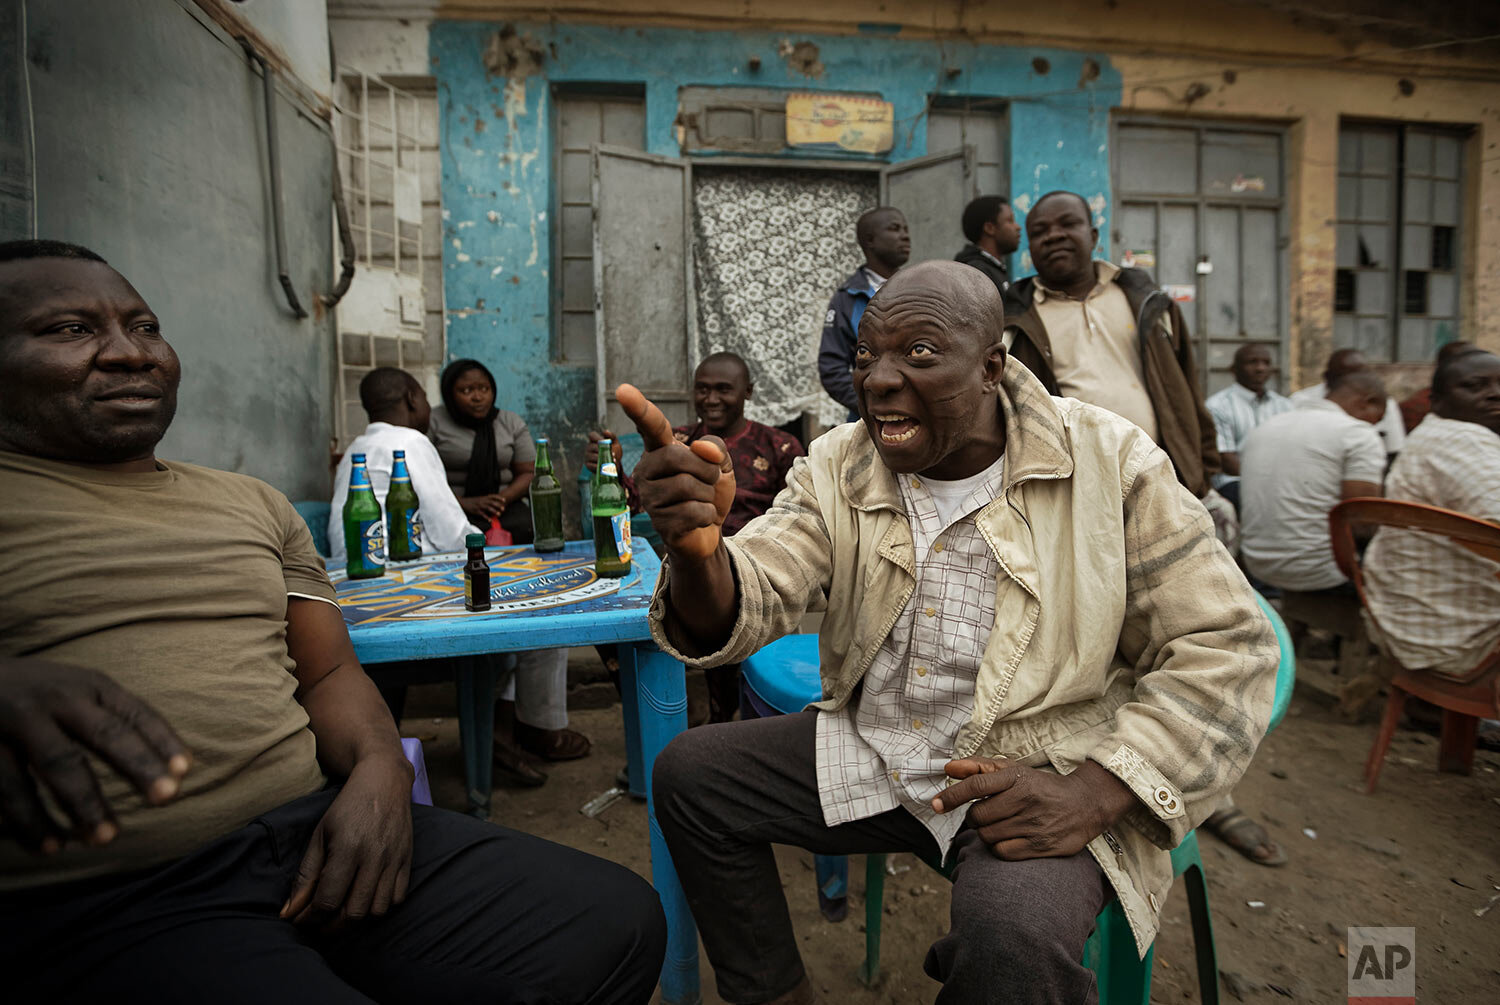  Nigerians engage in heated but friendly arguments about the postponement of the election, over beers at a street-side bar in the predominantly-Christian neighborhood of Sabon Gari in Kano, northern Nigeria, on Feb. 16, 2019. (AP Photo/Ben Curtis) 